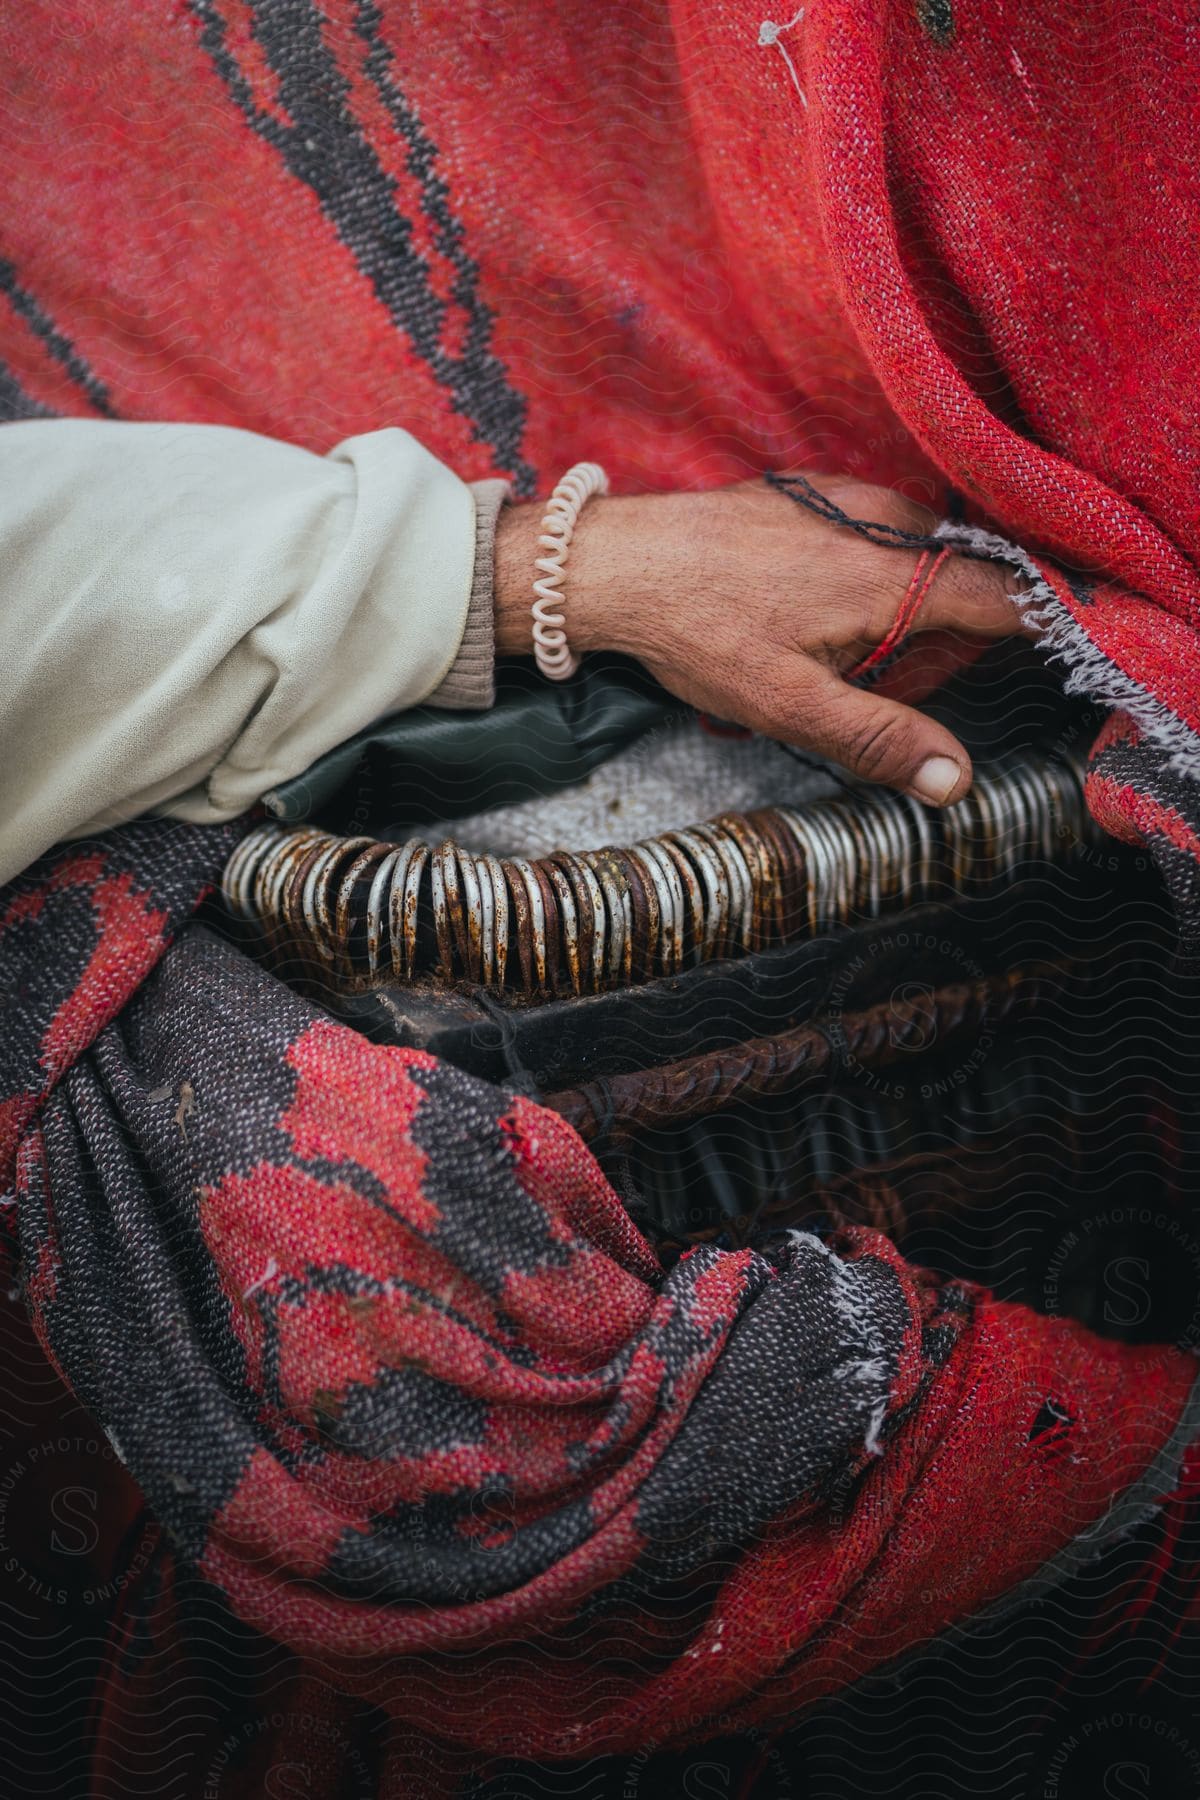 An old woman's hand on a basket parcially covered with a black and red blanket.